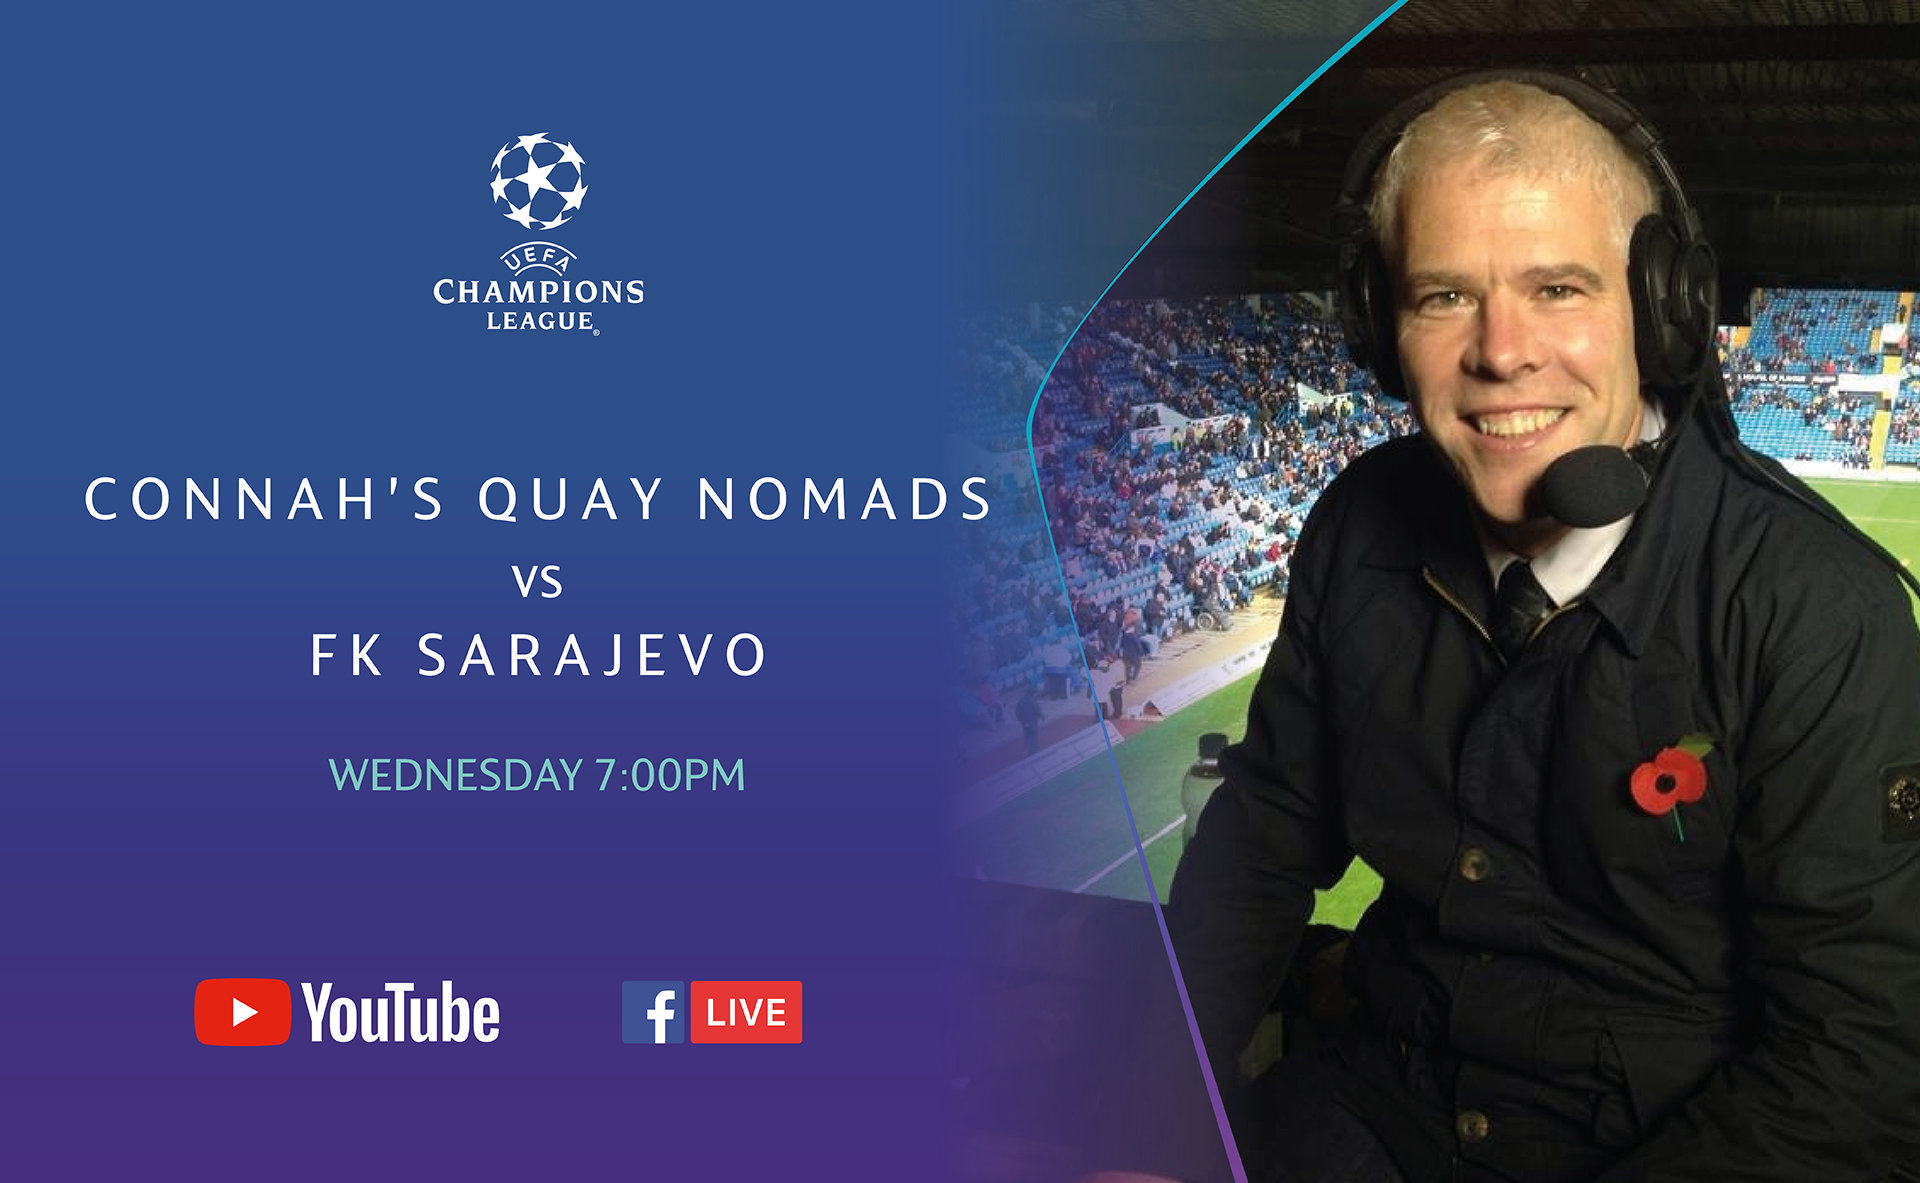 Former Sky Sports correspondent Bryn Law will commentate live on The Nomads vs FK Sarajevo